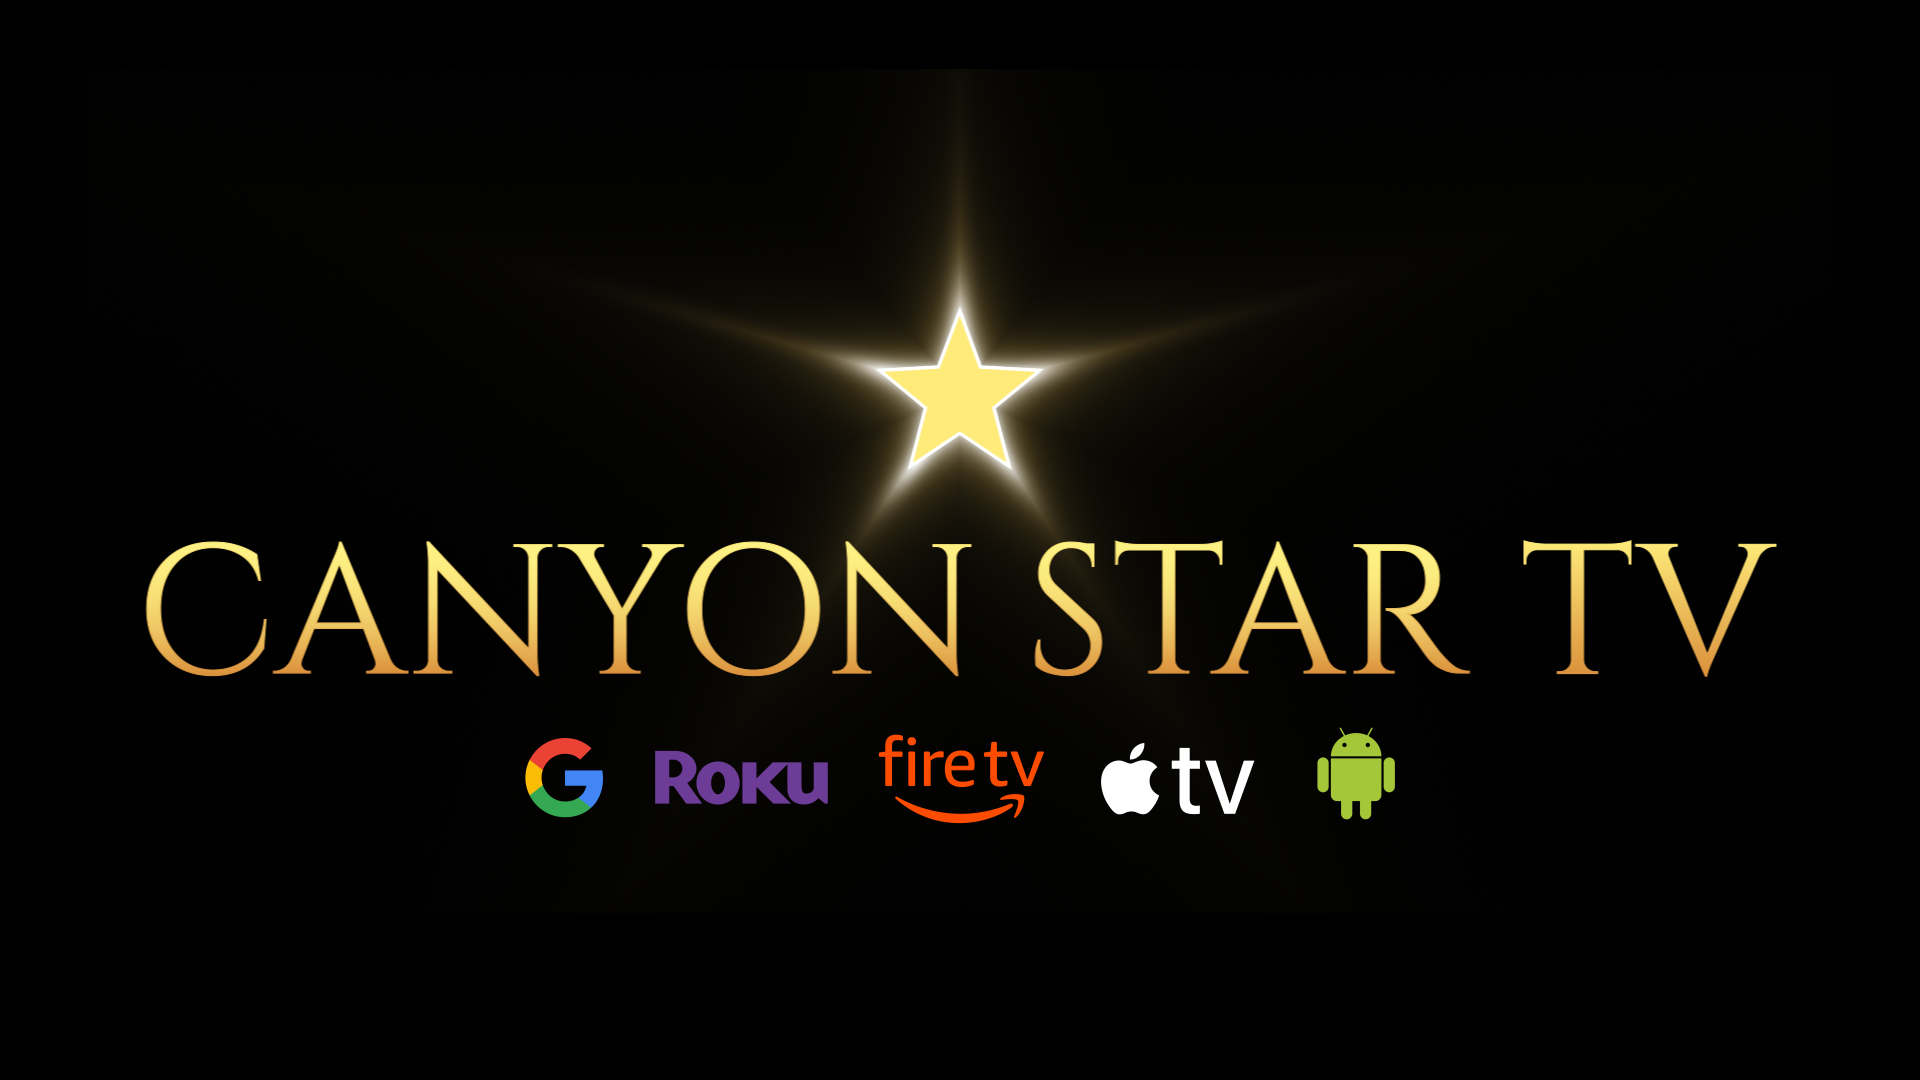 Canyon Star TV Announces Opening of First Round of Institutional Funding to Bring Family-Friendly Content to the Advertising Video on Demand (AVOD) Streaming Industry